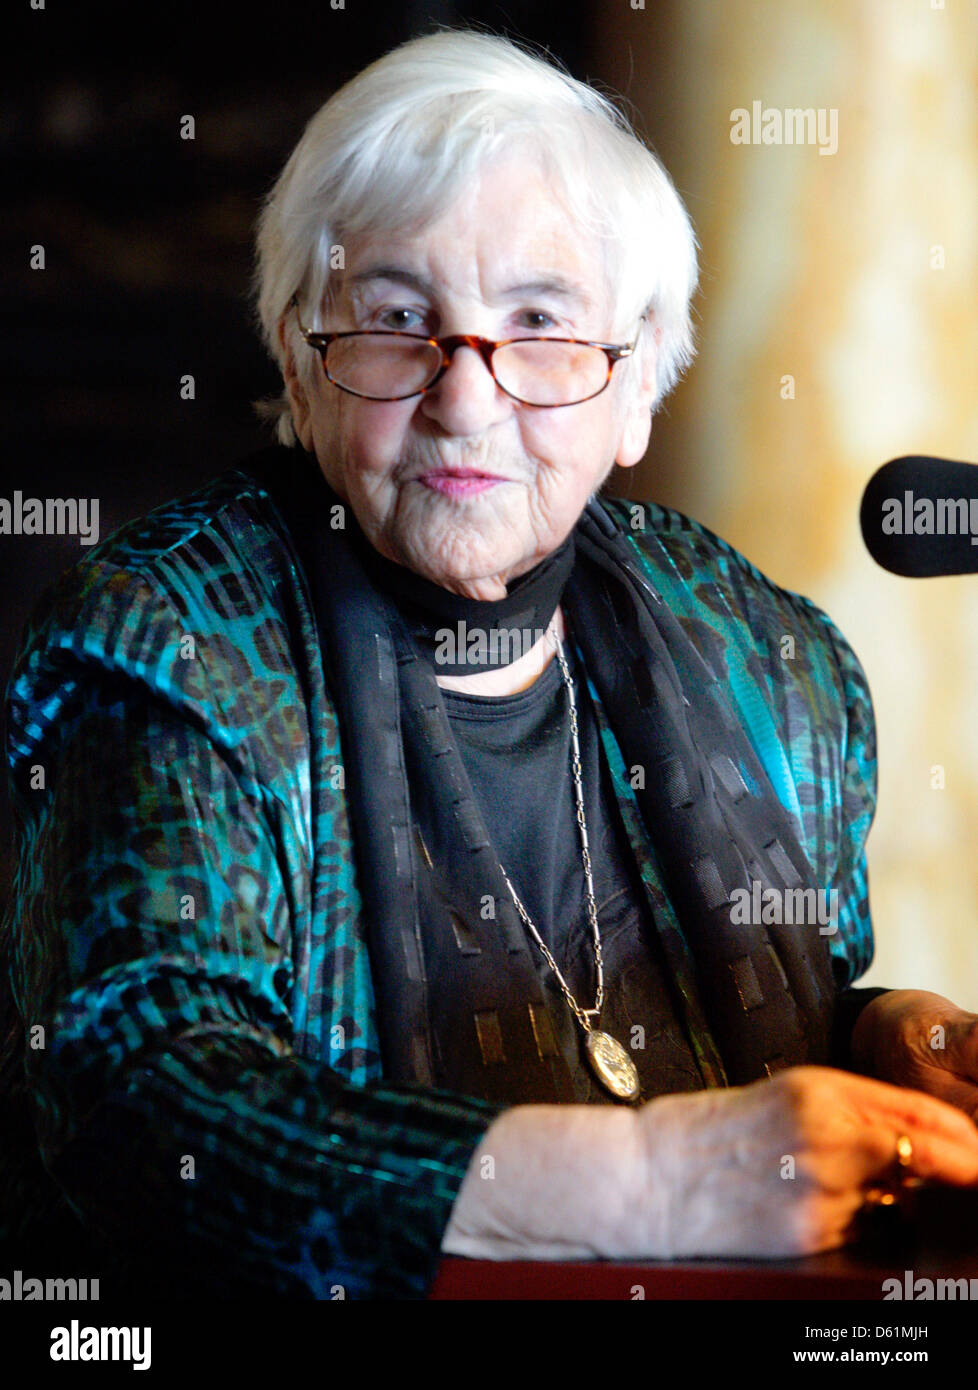 Esther Bejarano is pictured at the city hall in Hamburg, Germany, 26 April 2012. Mayor of Hamburg Olaf Scholz awarded her the Great Federal Cross of Merit. Bejarano is one of the last survivors of the girls' orchestra of Auschwitz. Photo: DANIEL BOCKWOLDT Stock Photo